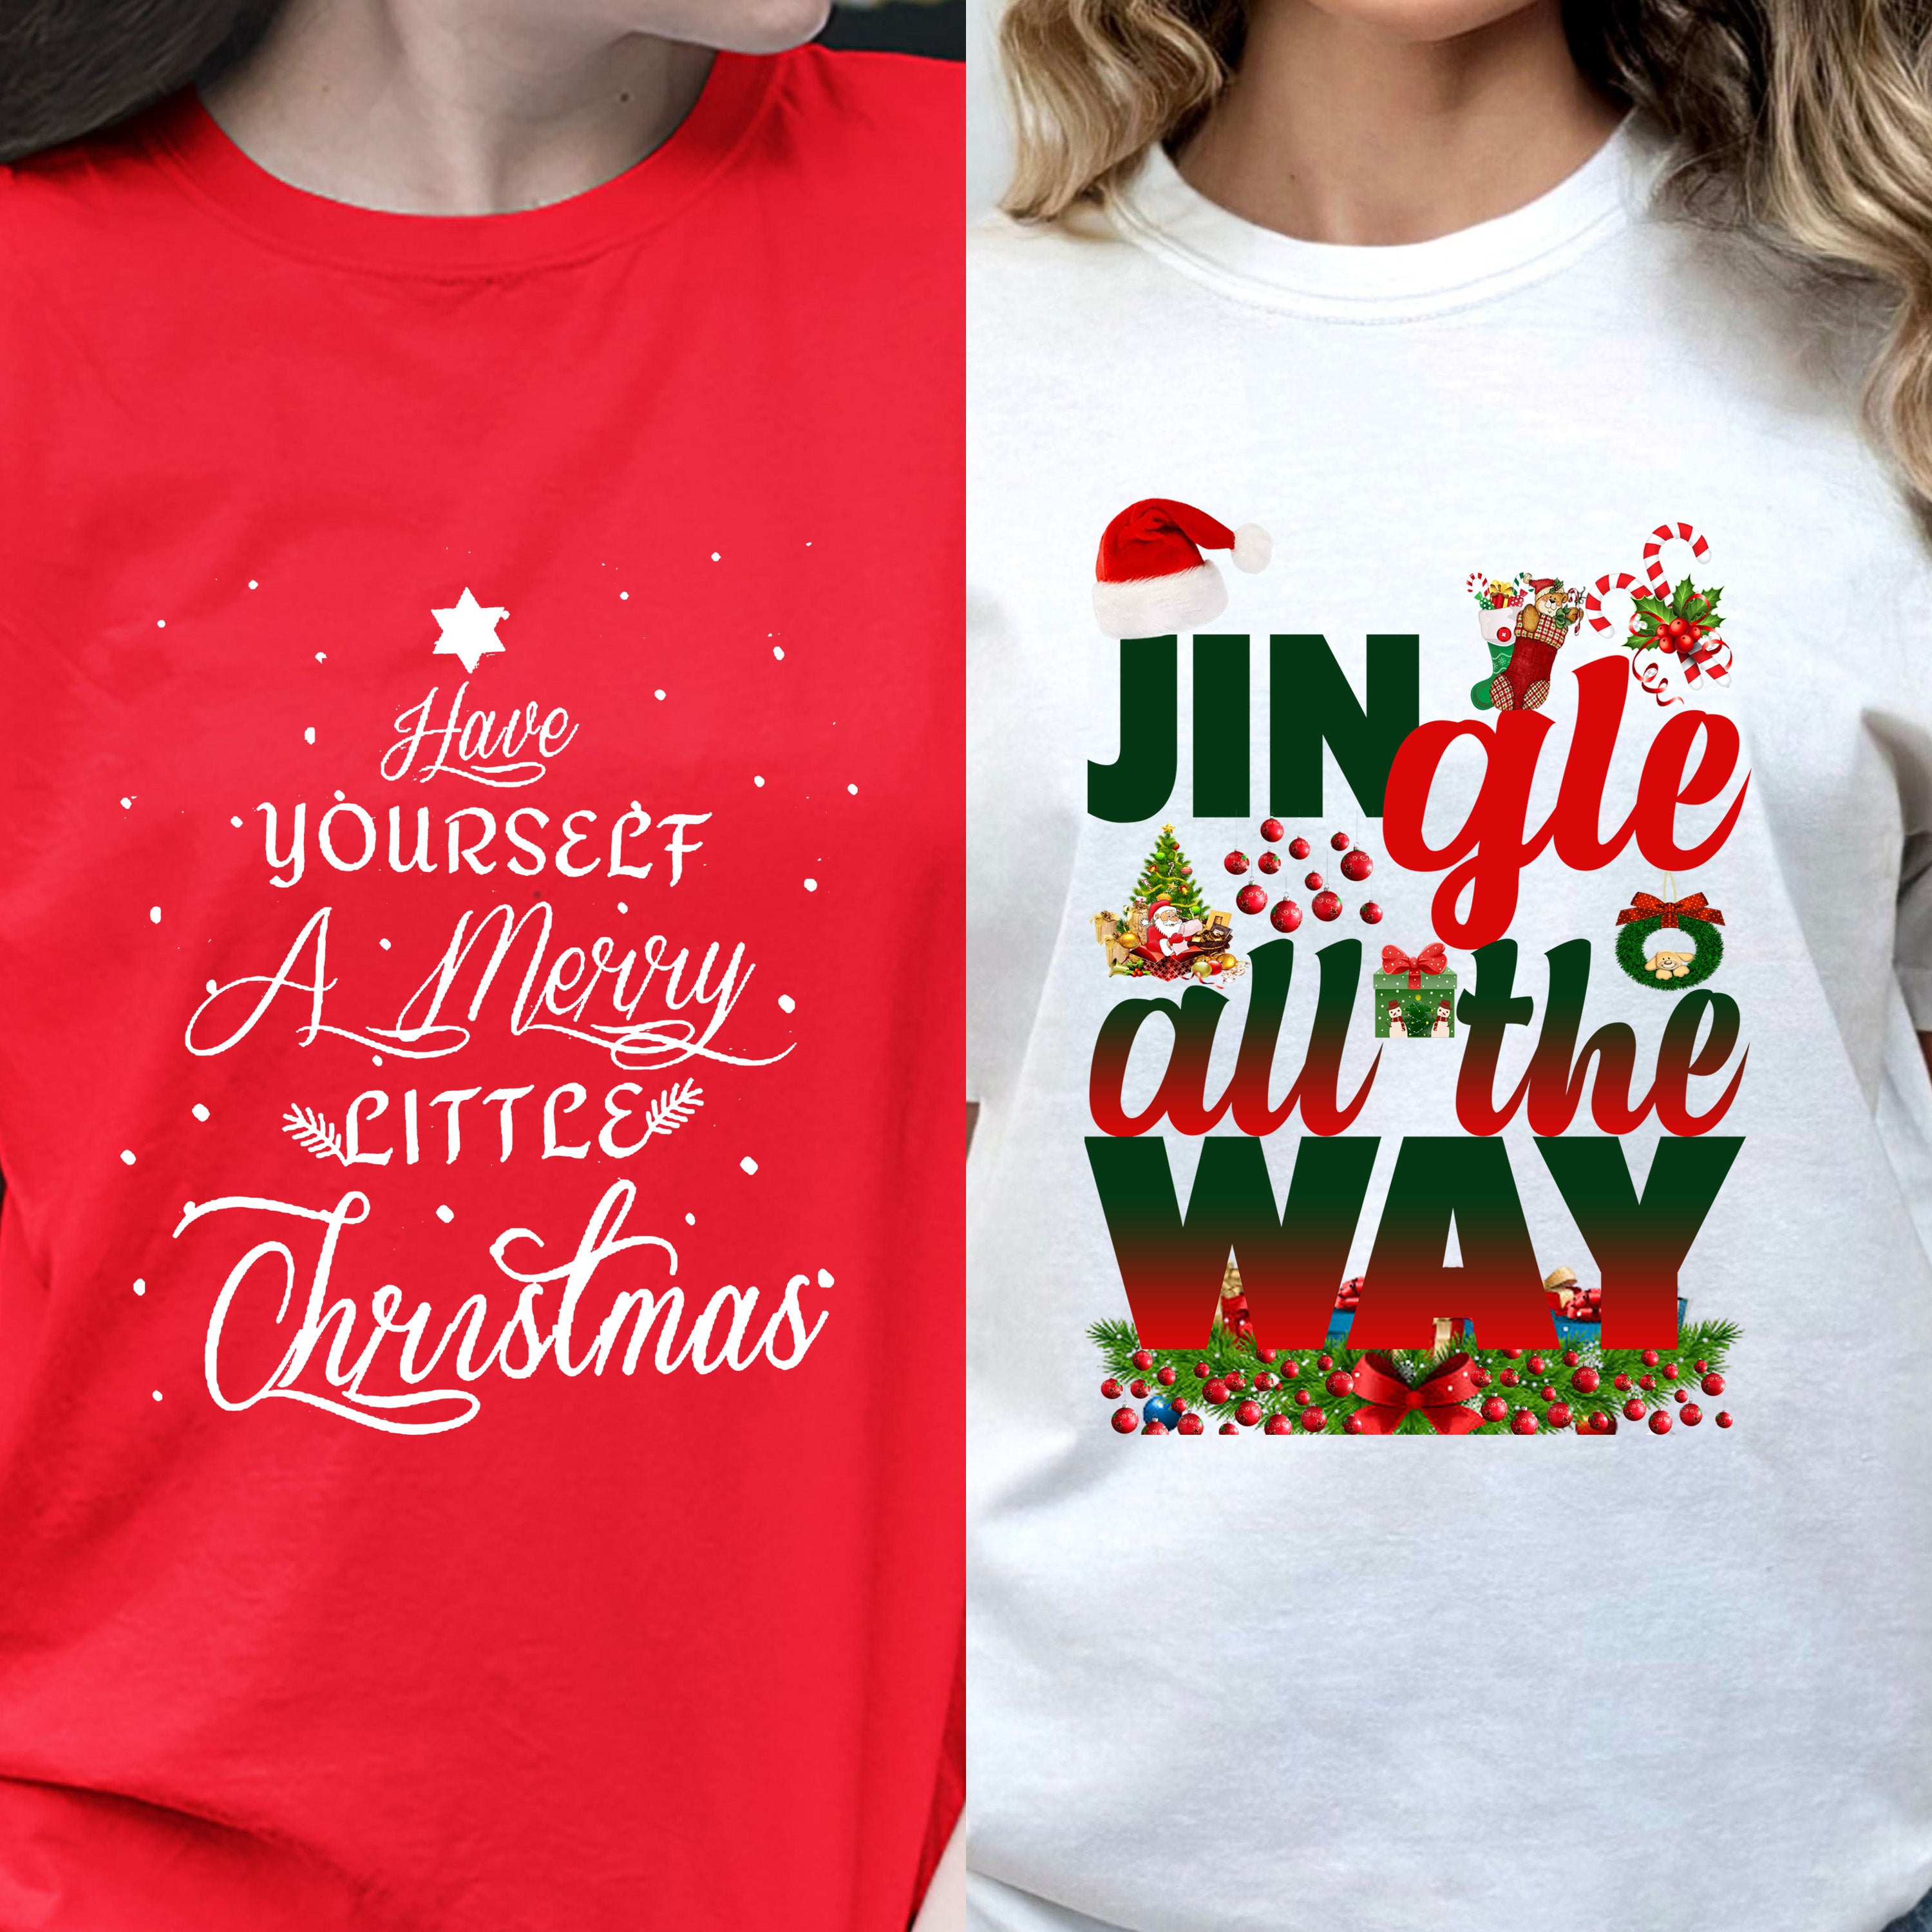 "Christmas Combo "Pack Of 2